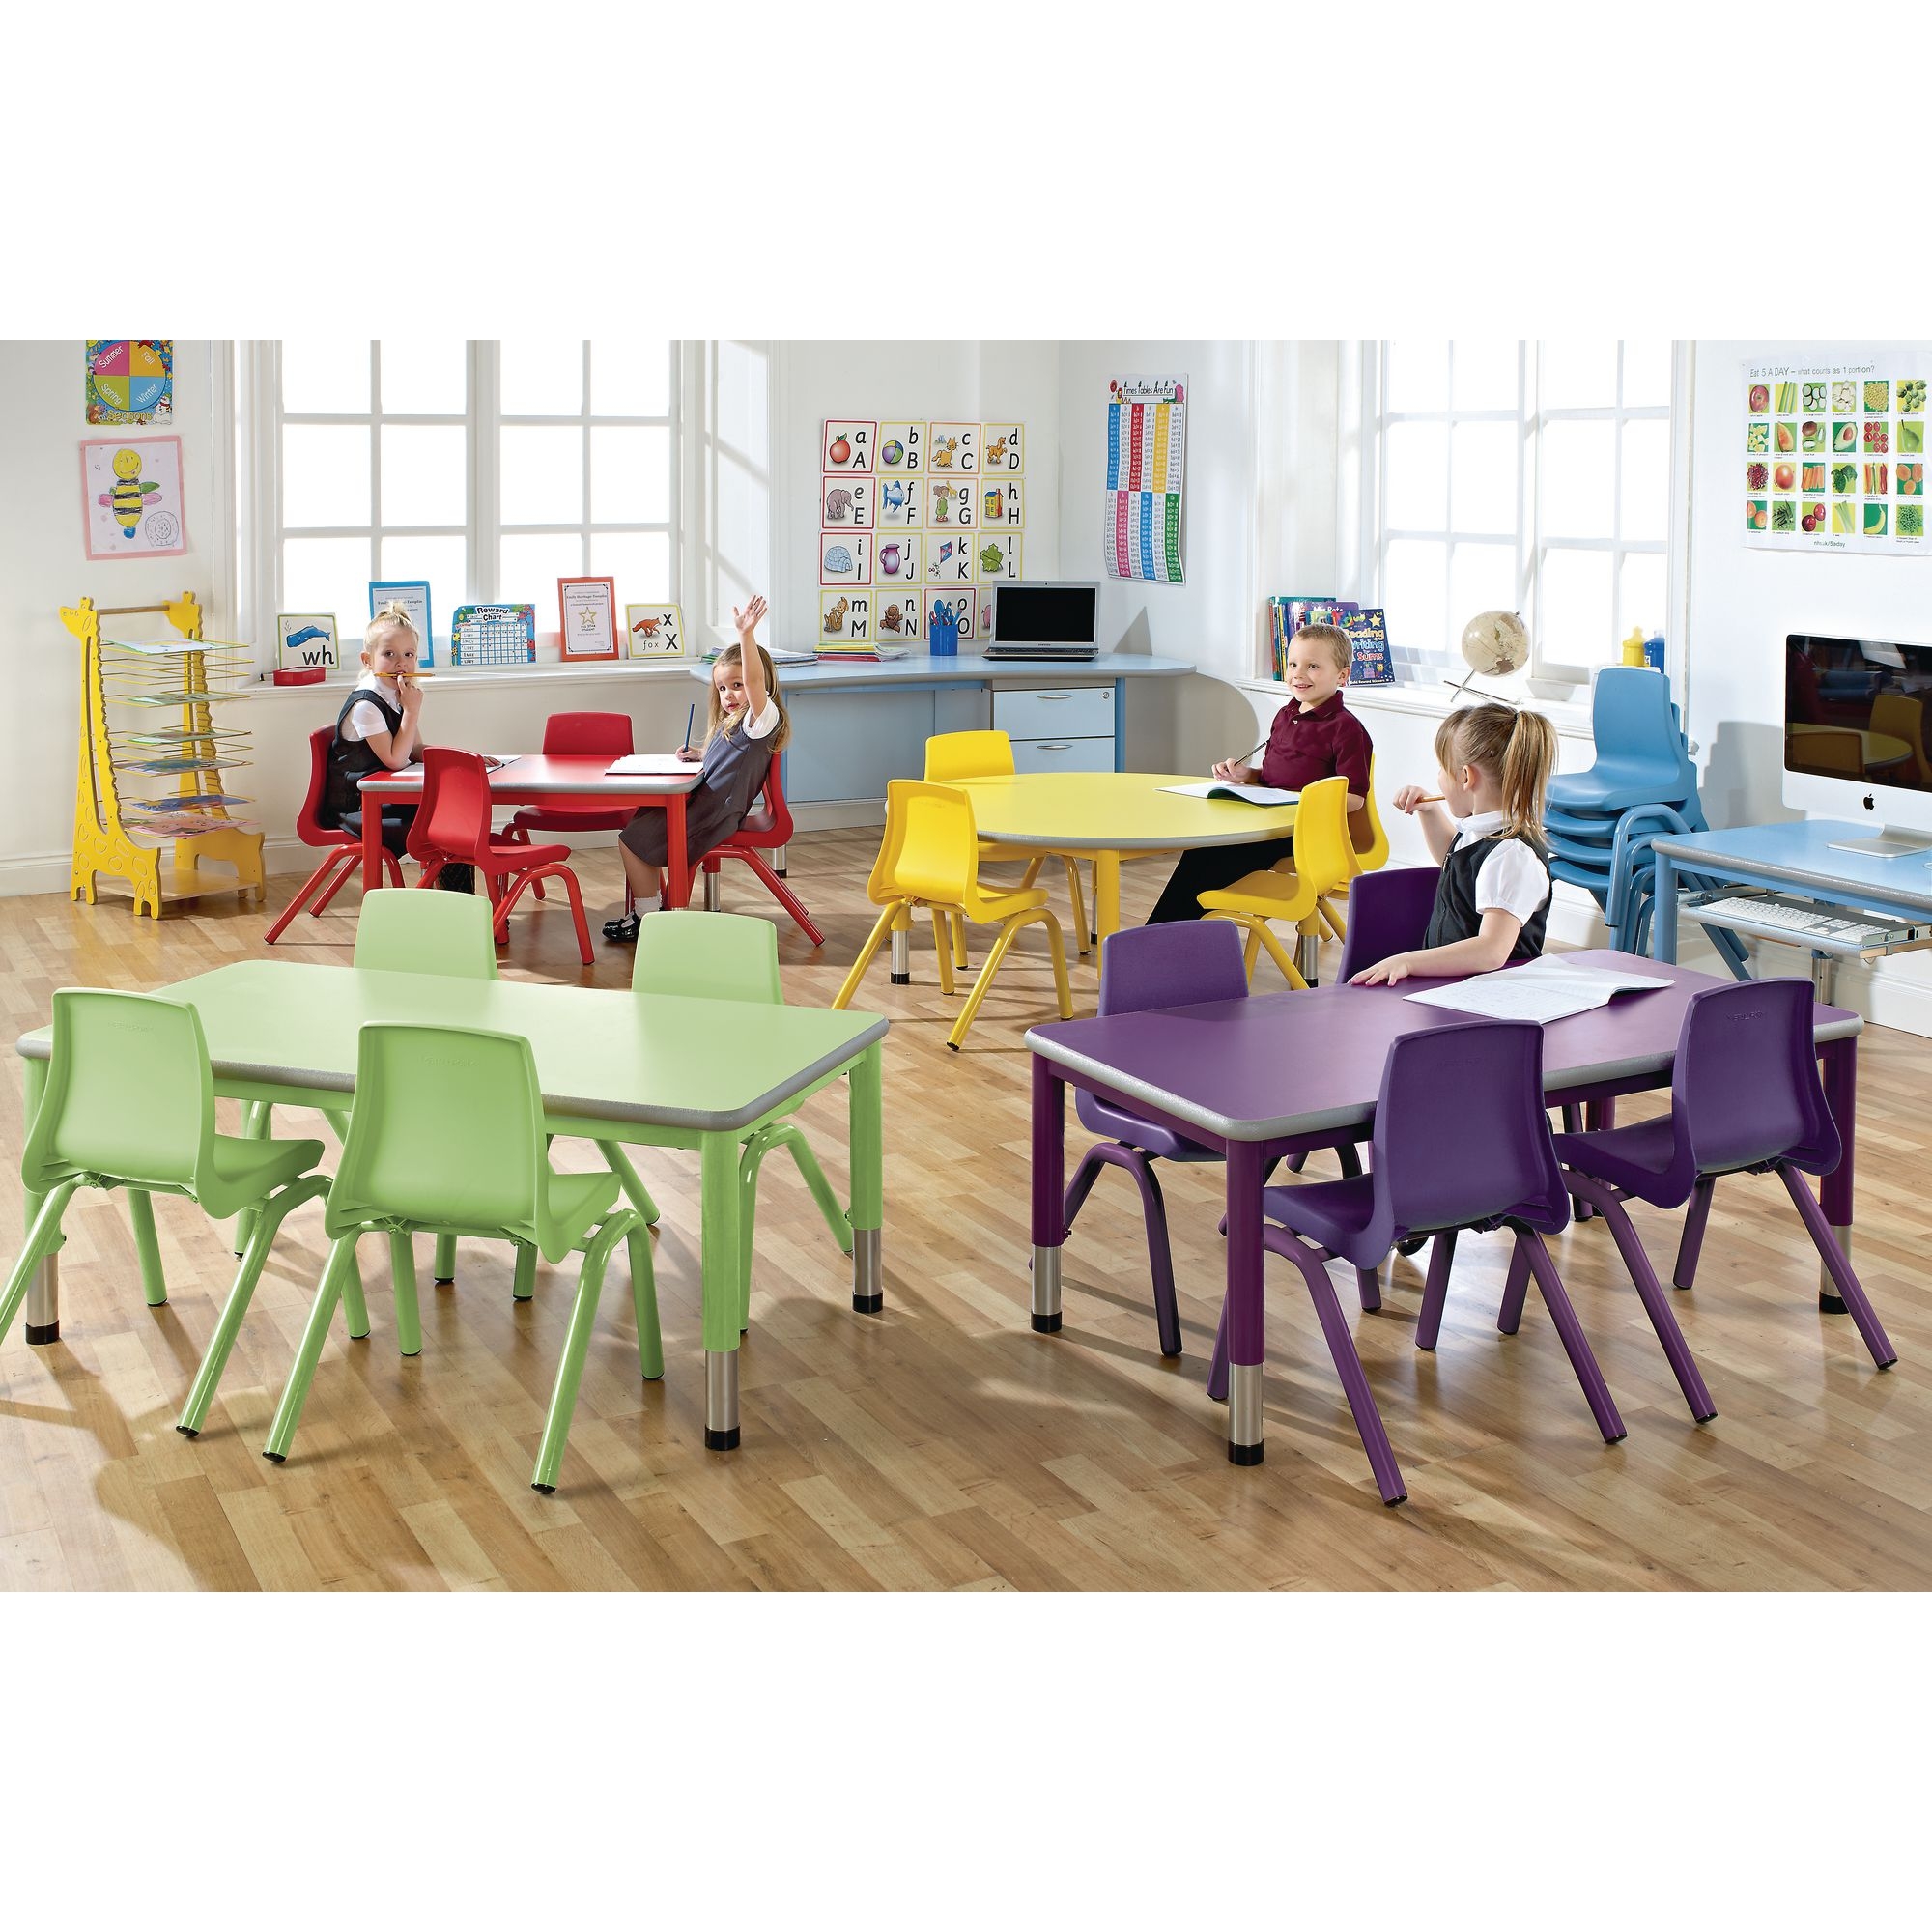 Harlequin Rectangular Height Adjustable Steel Classroom Pack: Table and 4 Chairs - 900 x 600 x 590mm - Tangy Lime